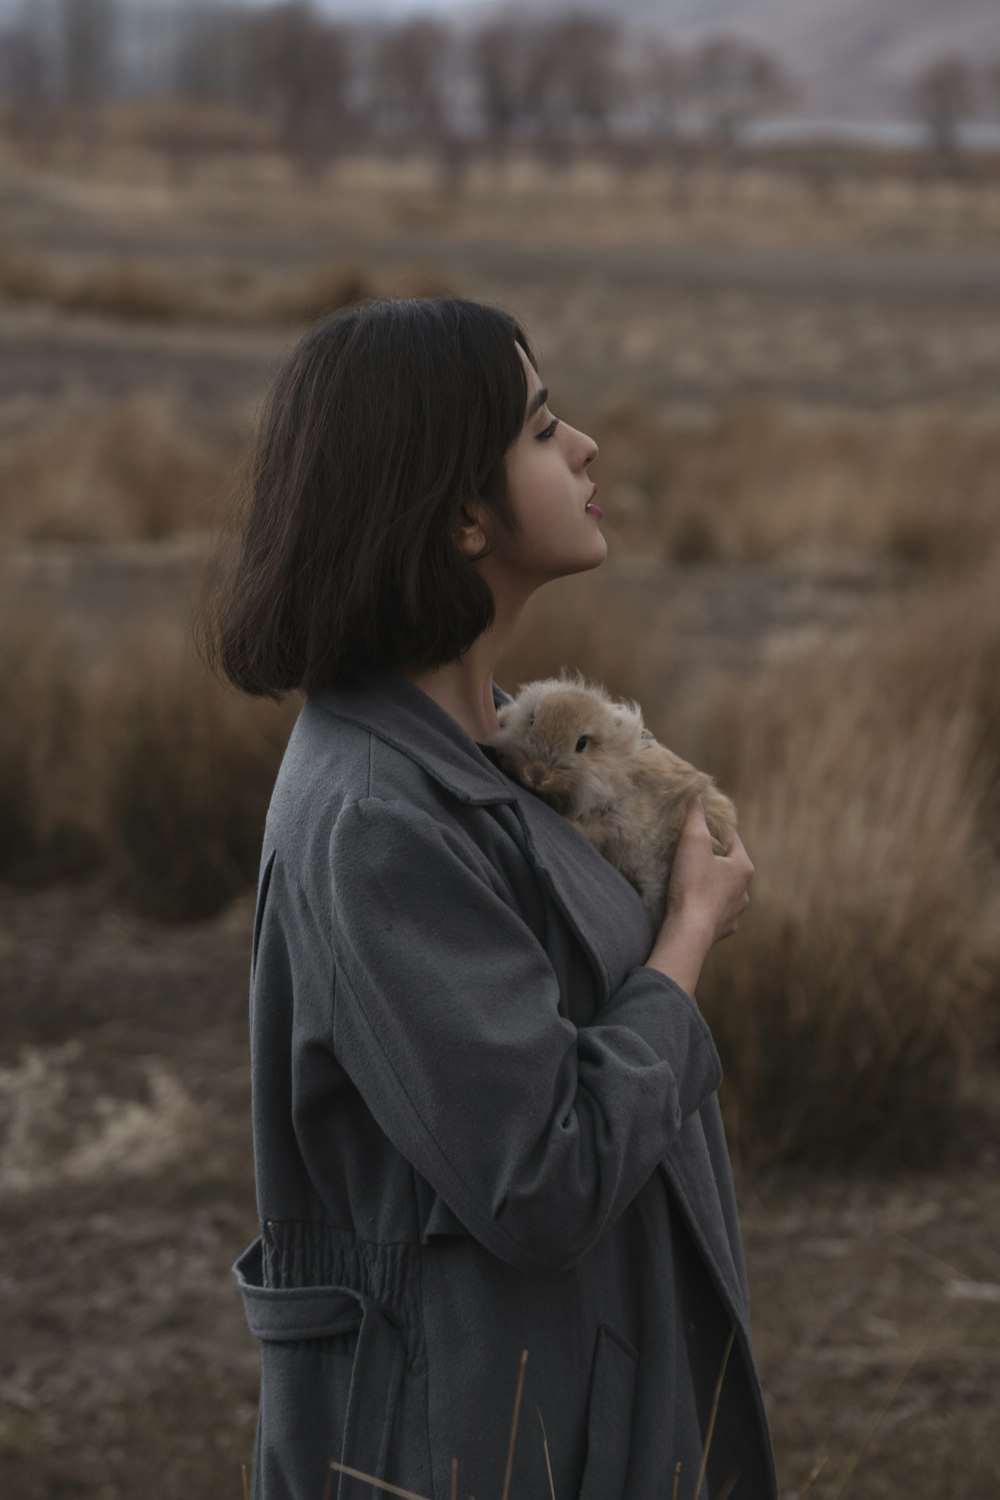 a woman standing in a field holding a teddy bear